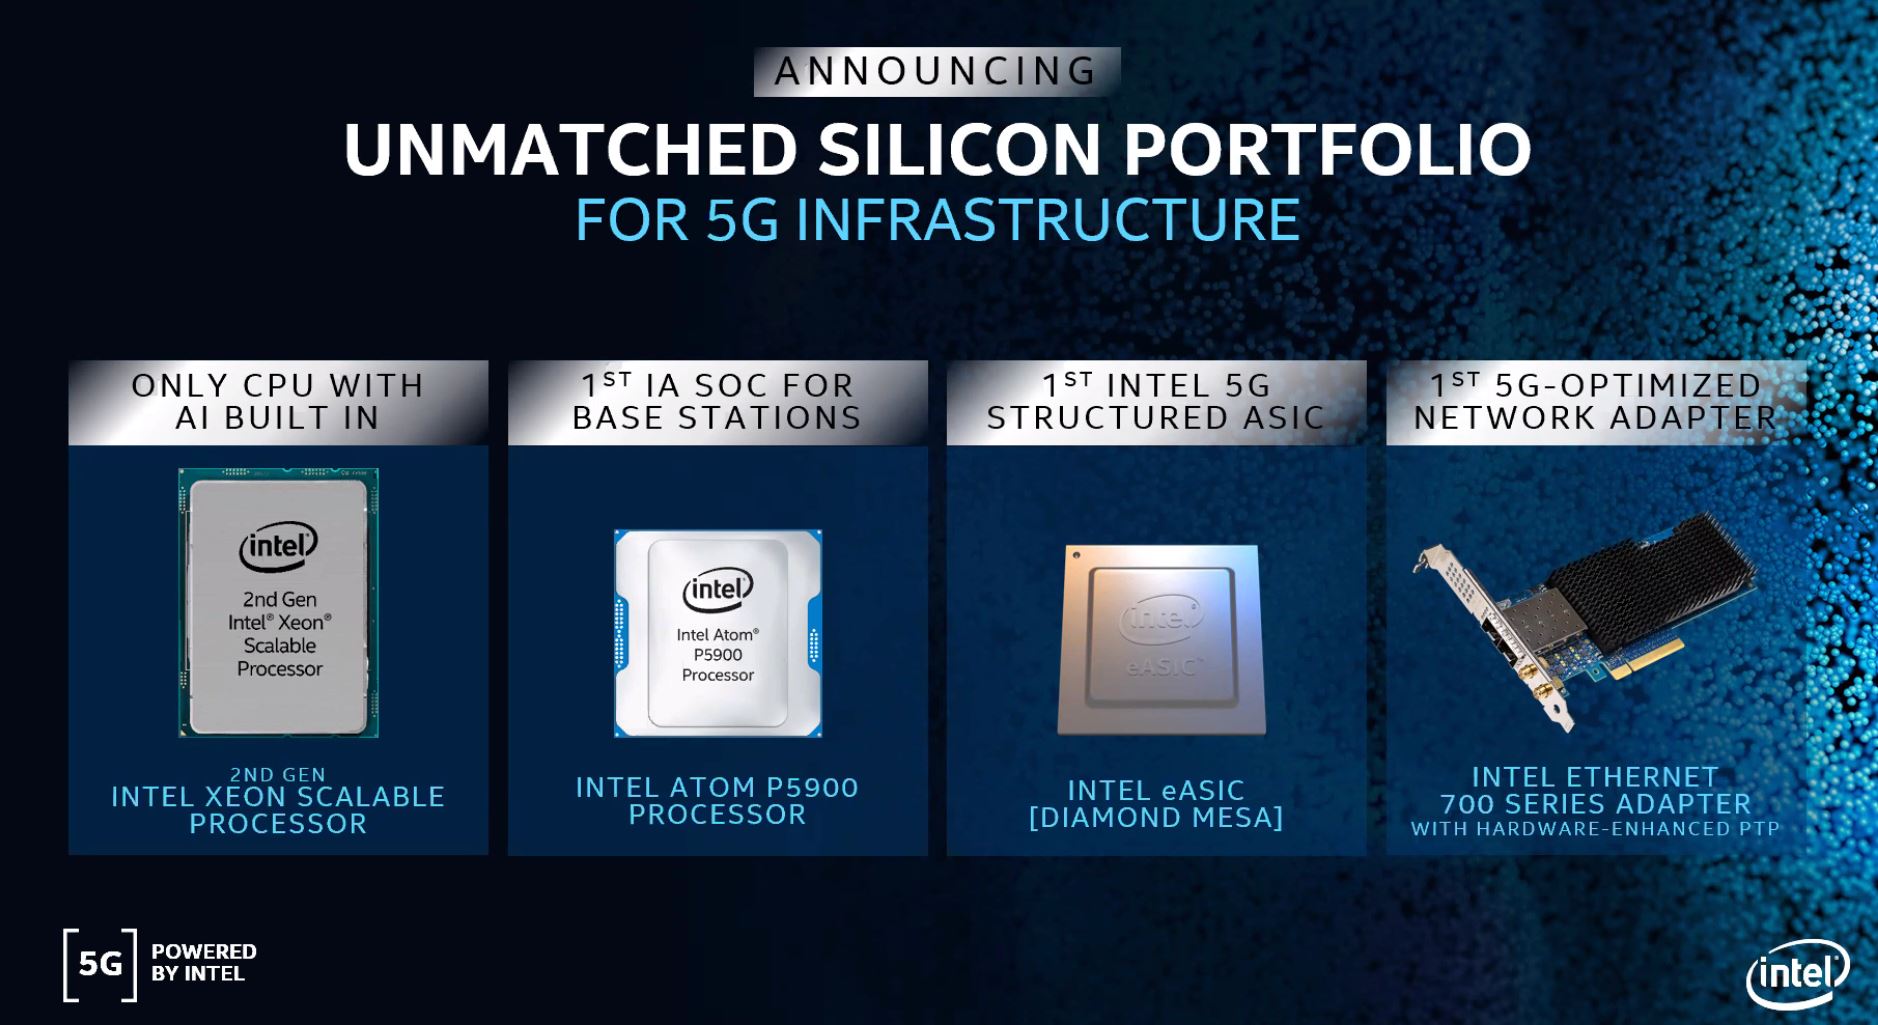 intel-atom-p5900-series-along-with-easic-diamond-mesa-and-intel-ethernet-700-with-hardware-ptp